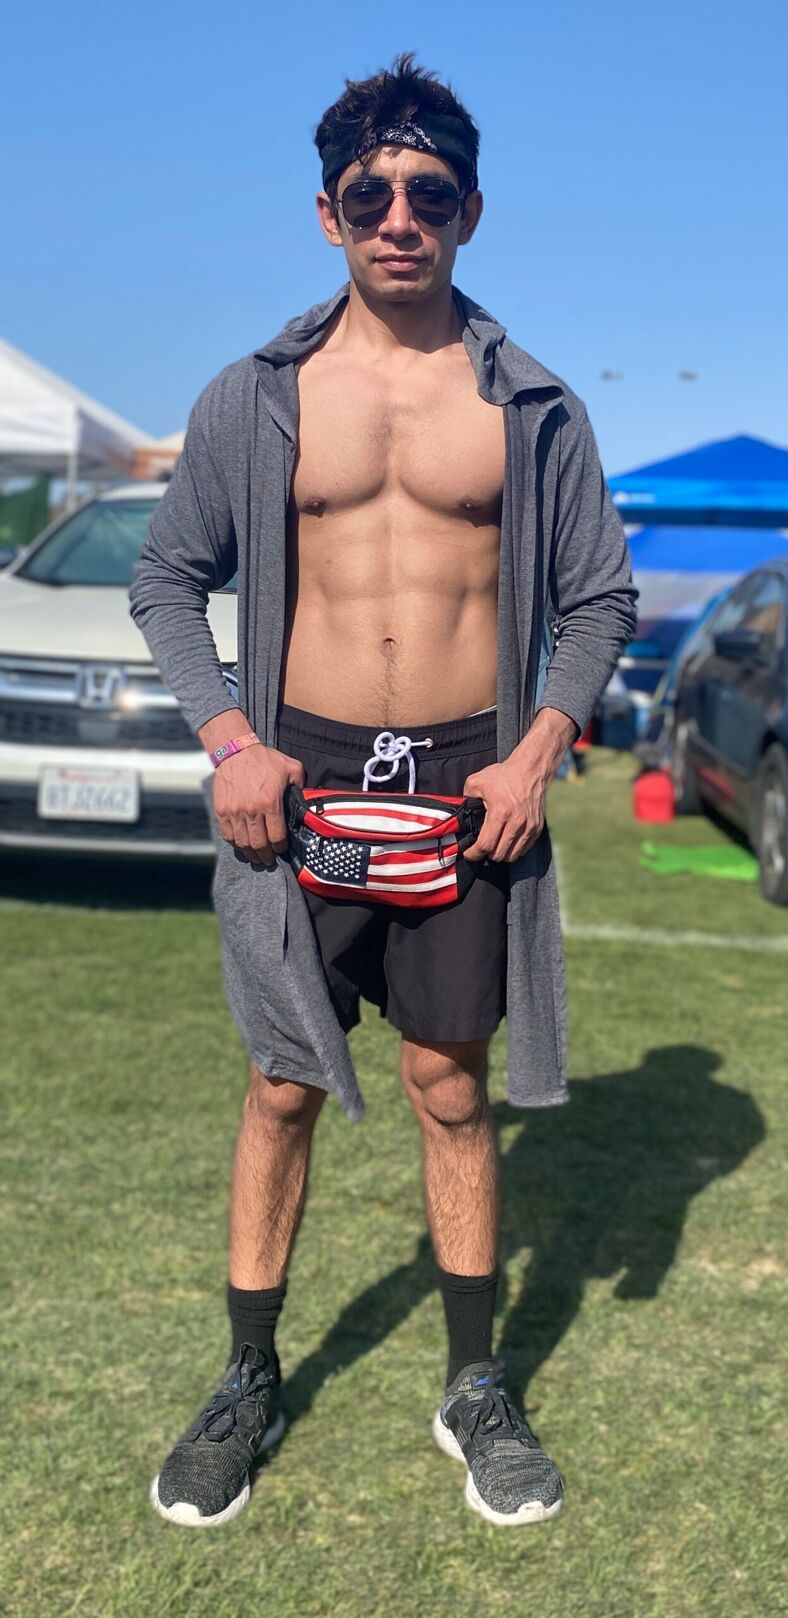 Franky from San Diego sporting pecs and American pride.